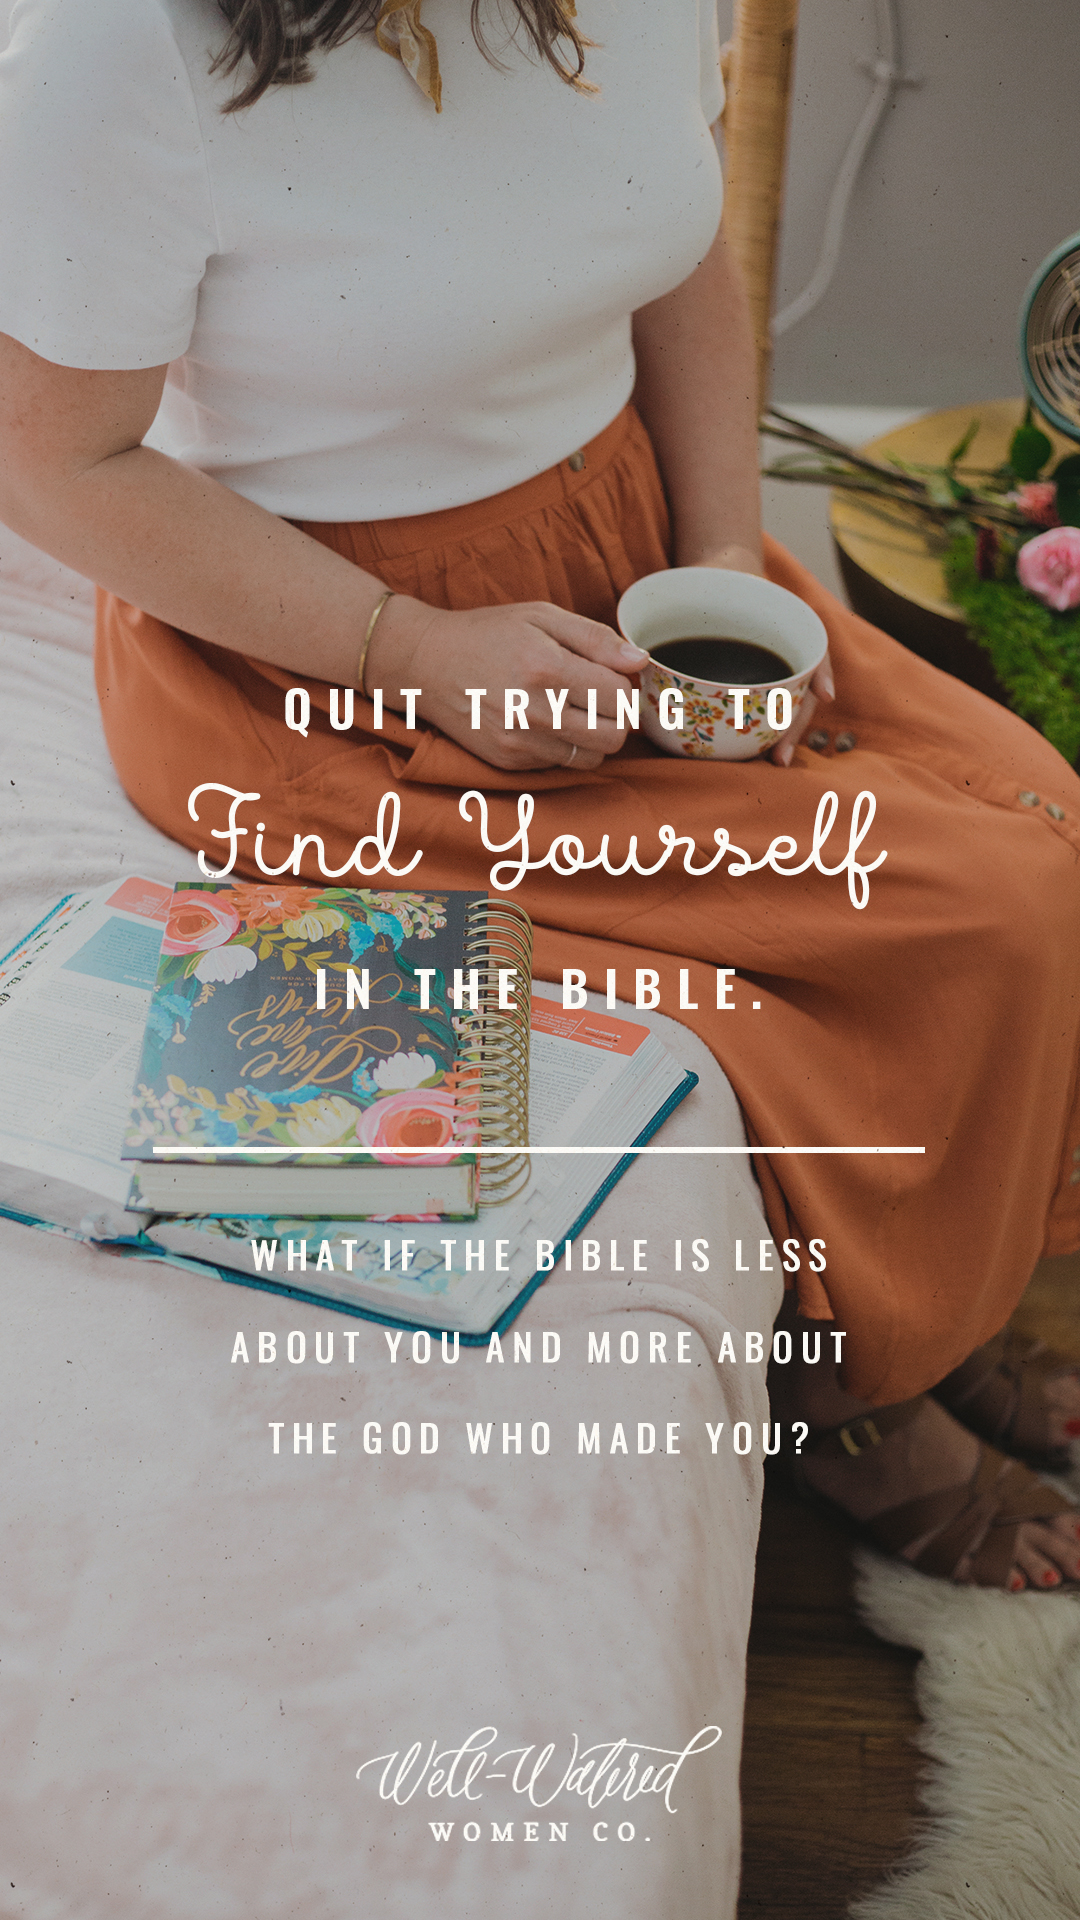 Well Watered Women Blog | Quit Tryinig to Find Yourself in the Bible